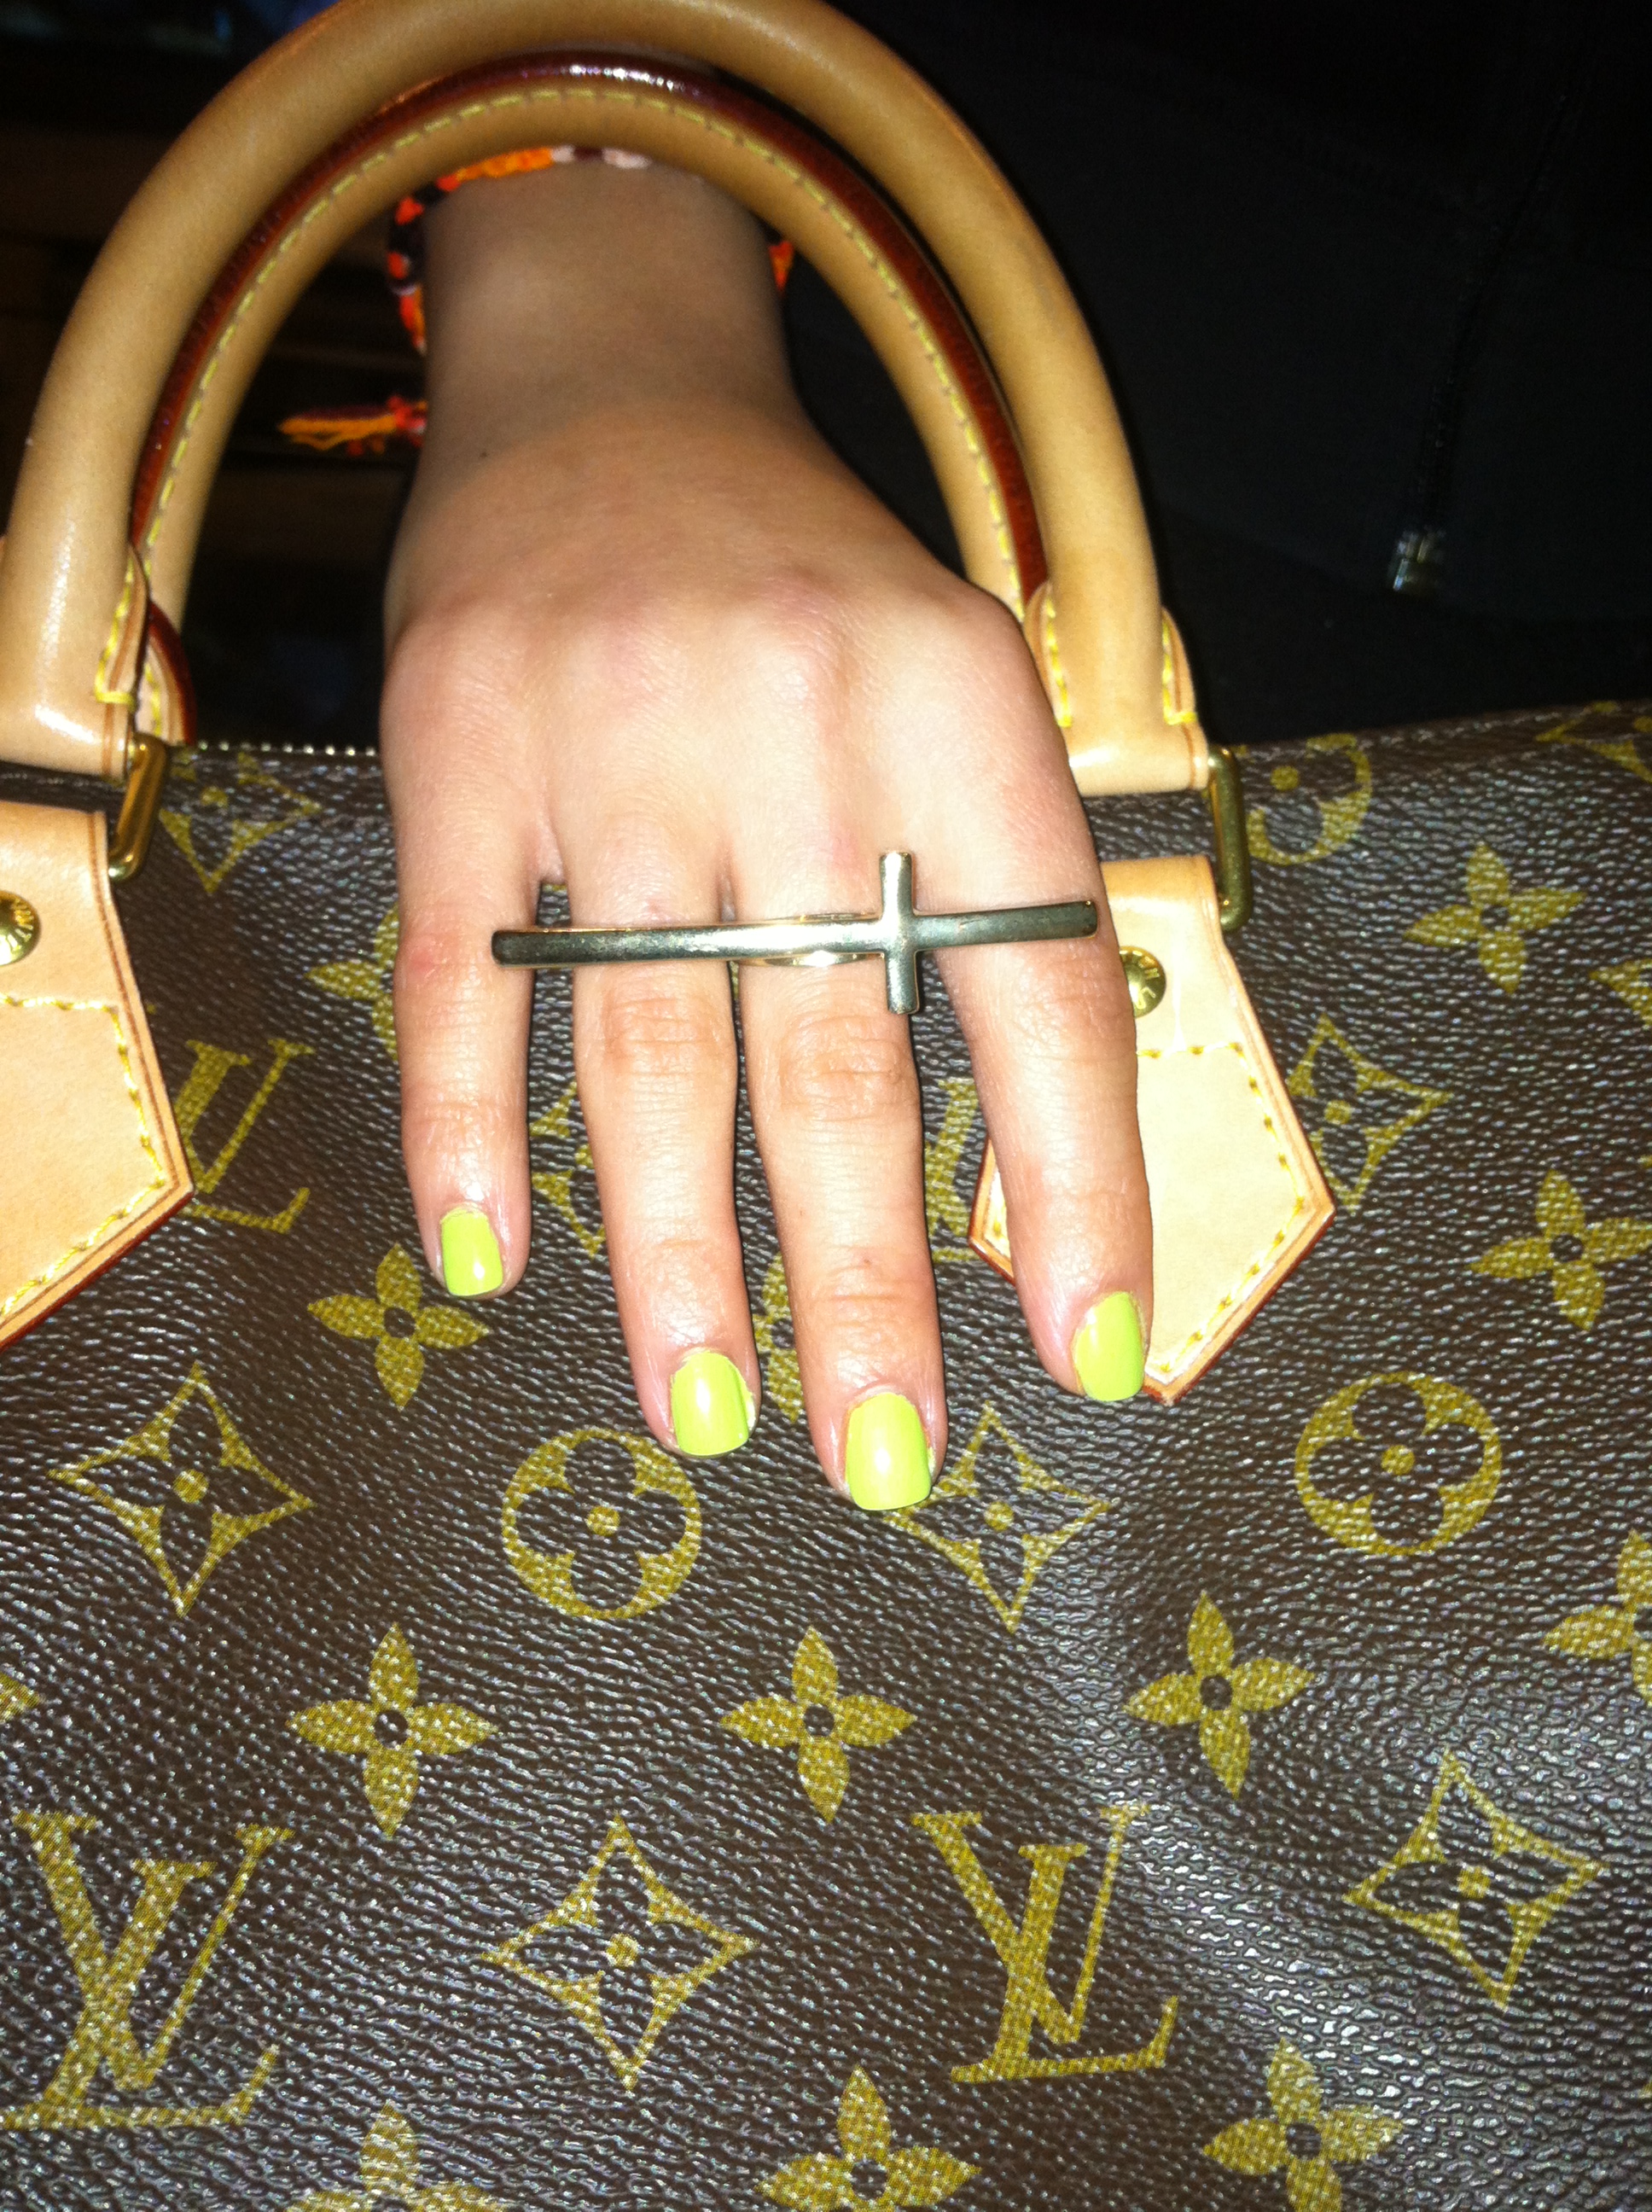 I of course paired it with my dashion Louis Vuitton and a simple black dress